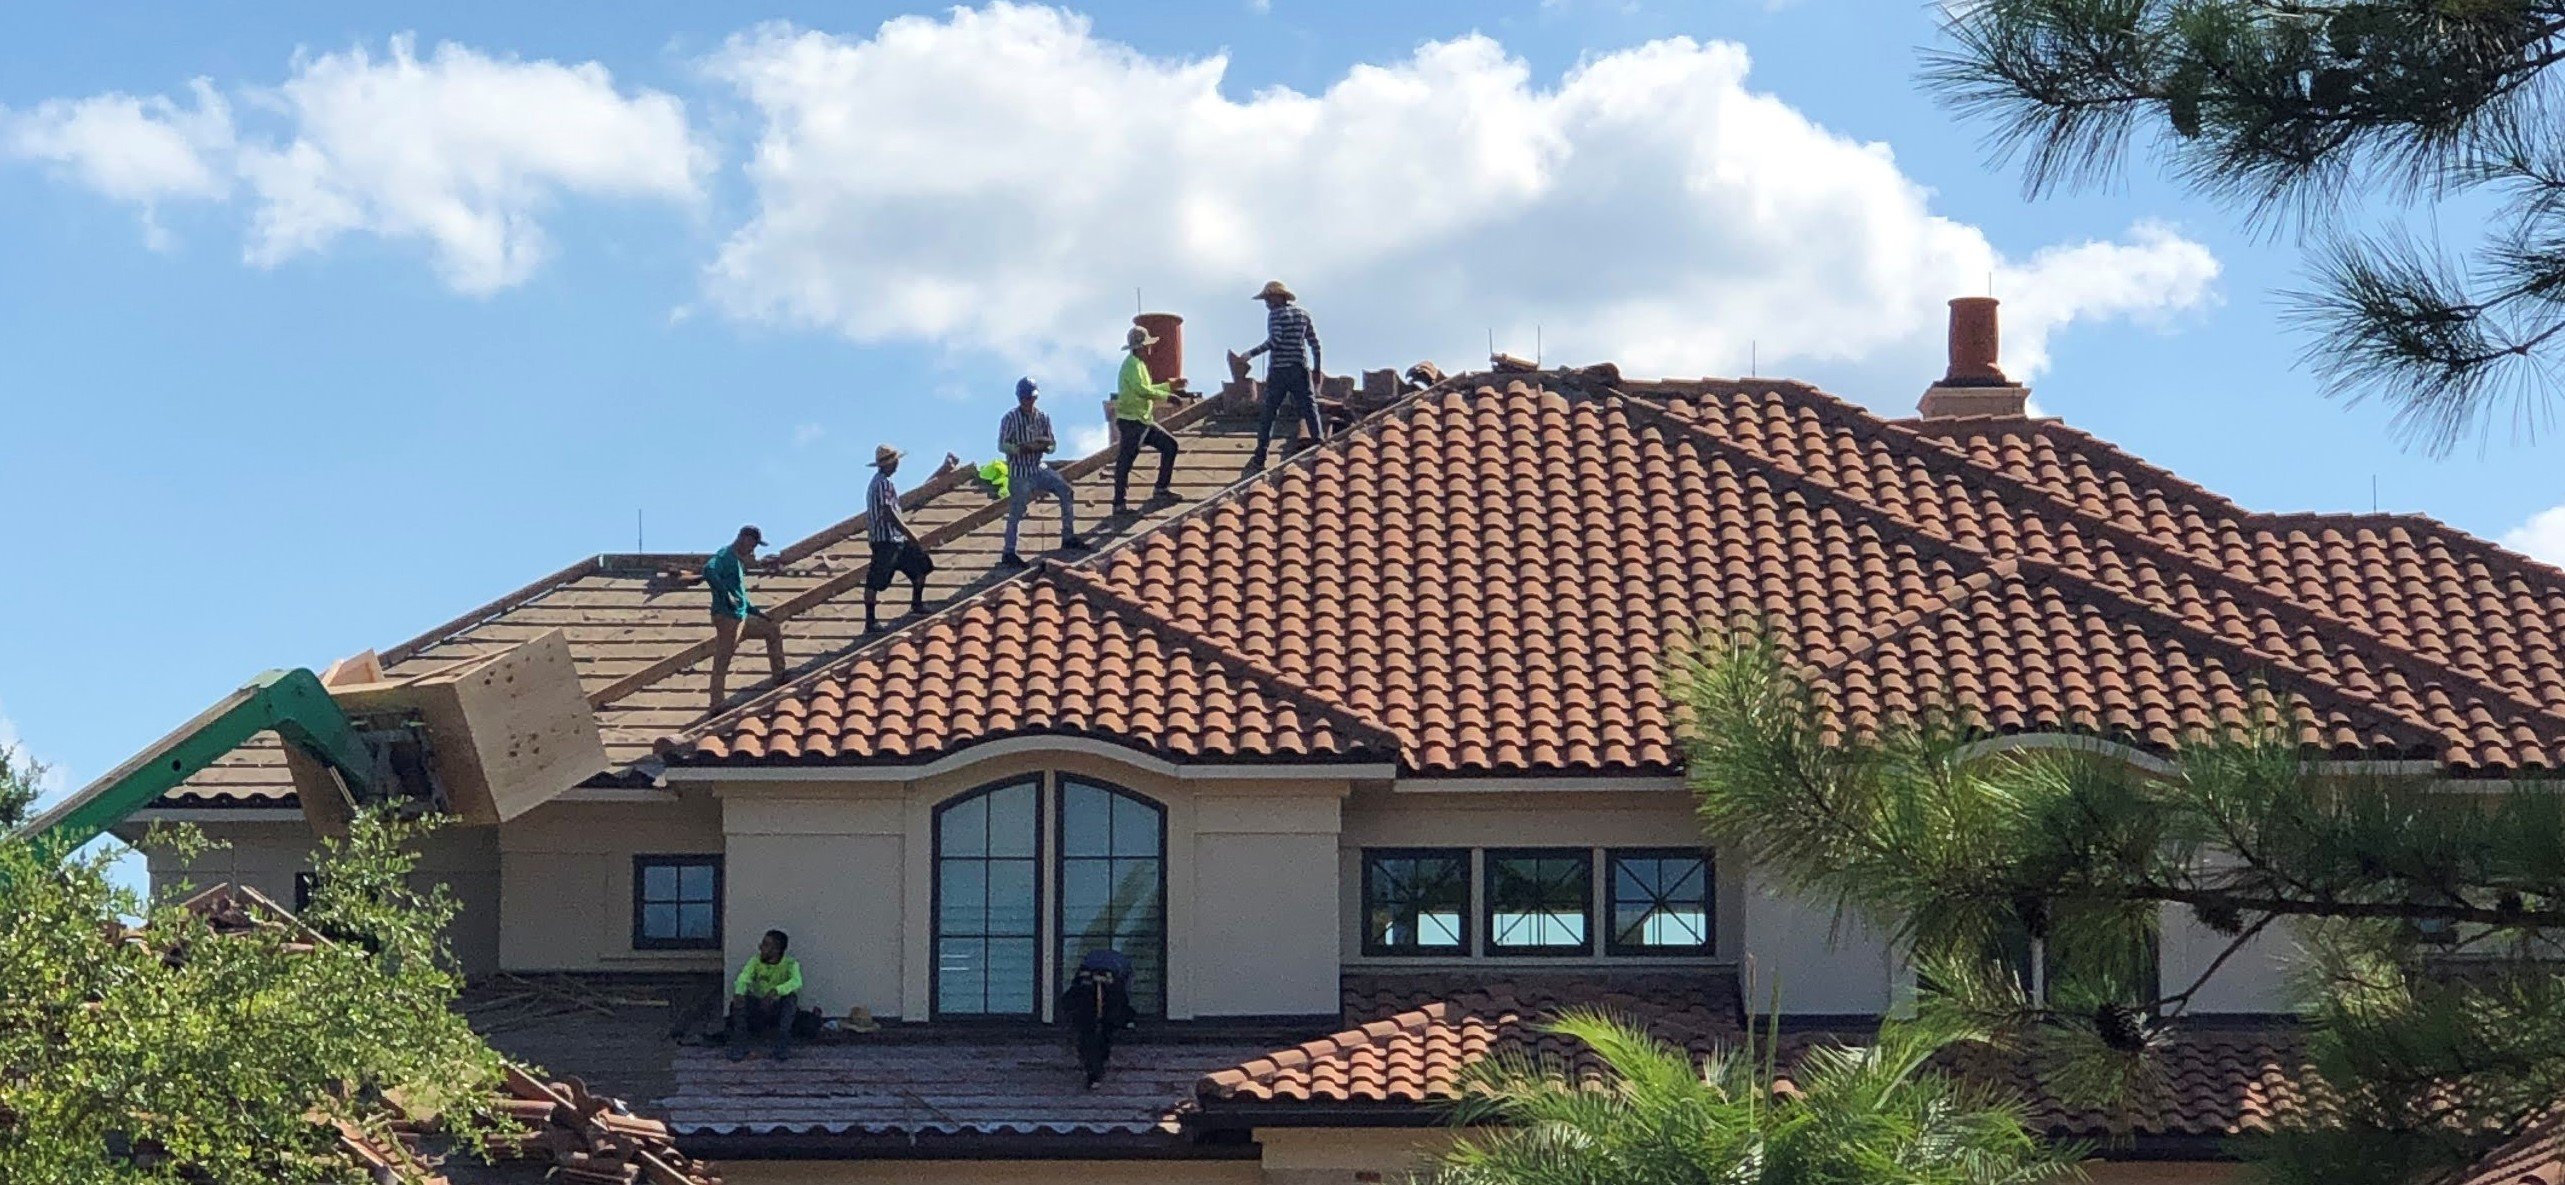 RC workers standing on roof 